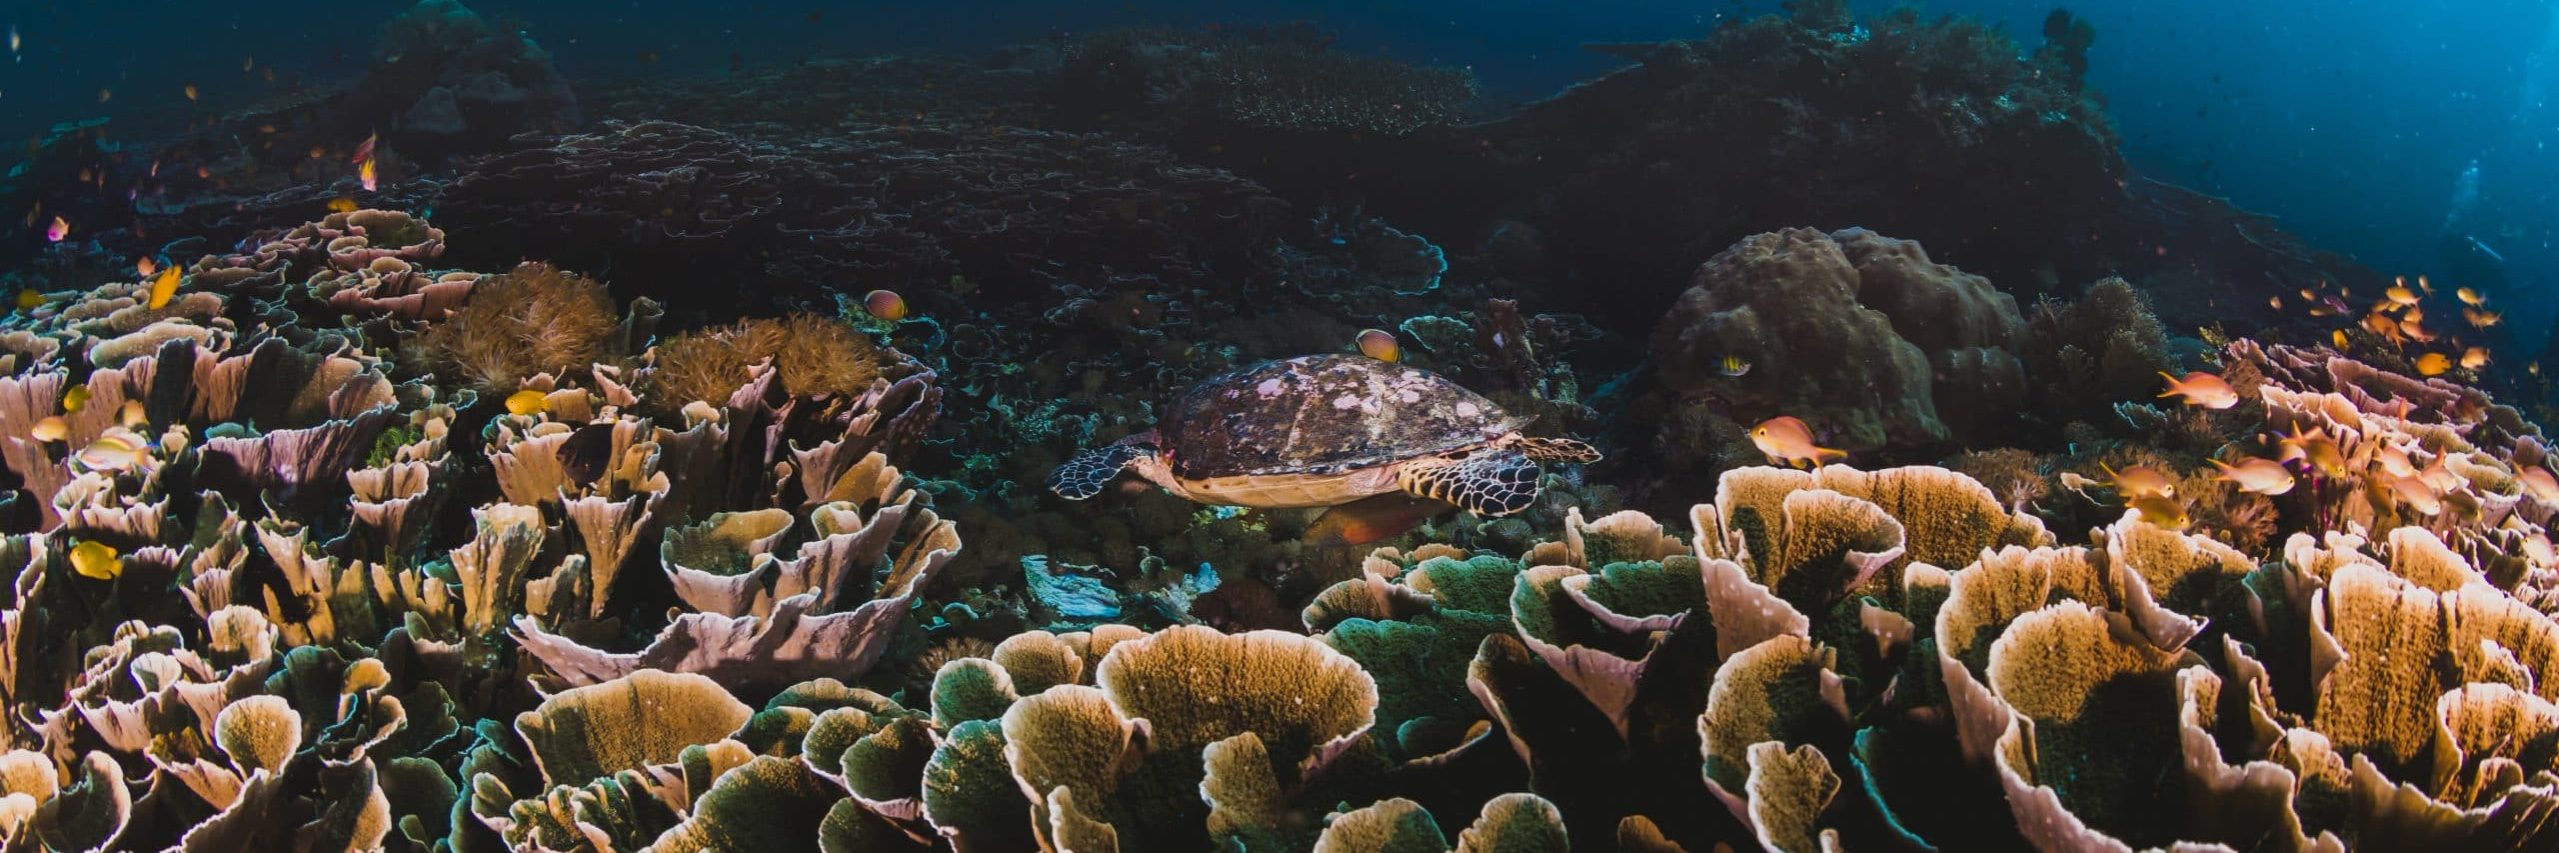 corals and sponges around a thriving tropical coral reef